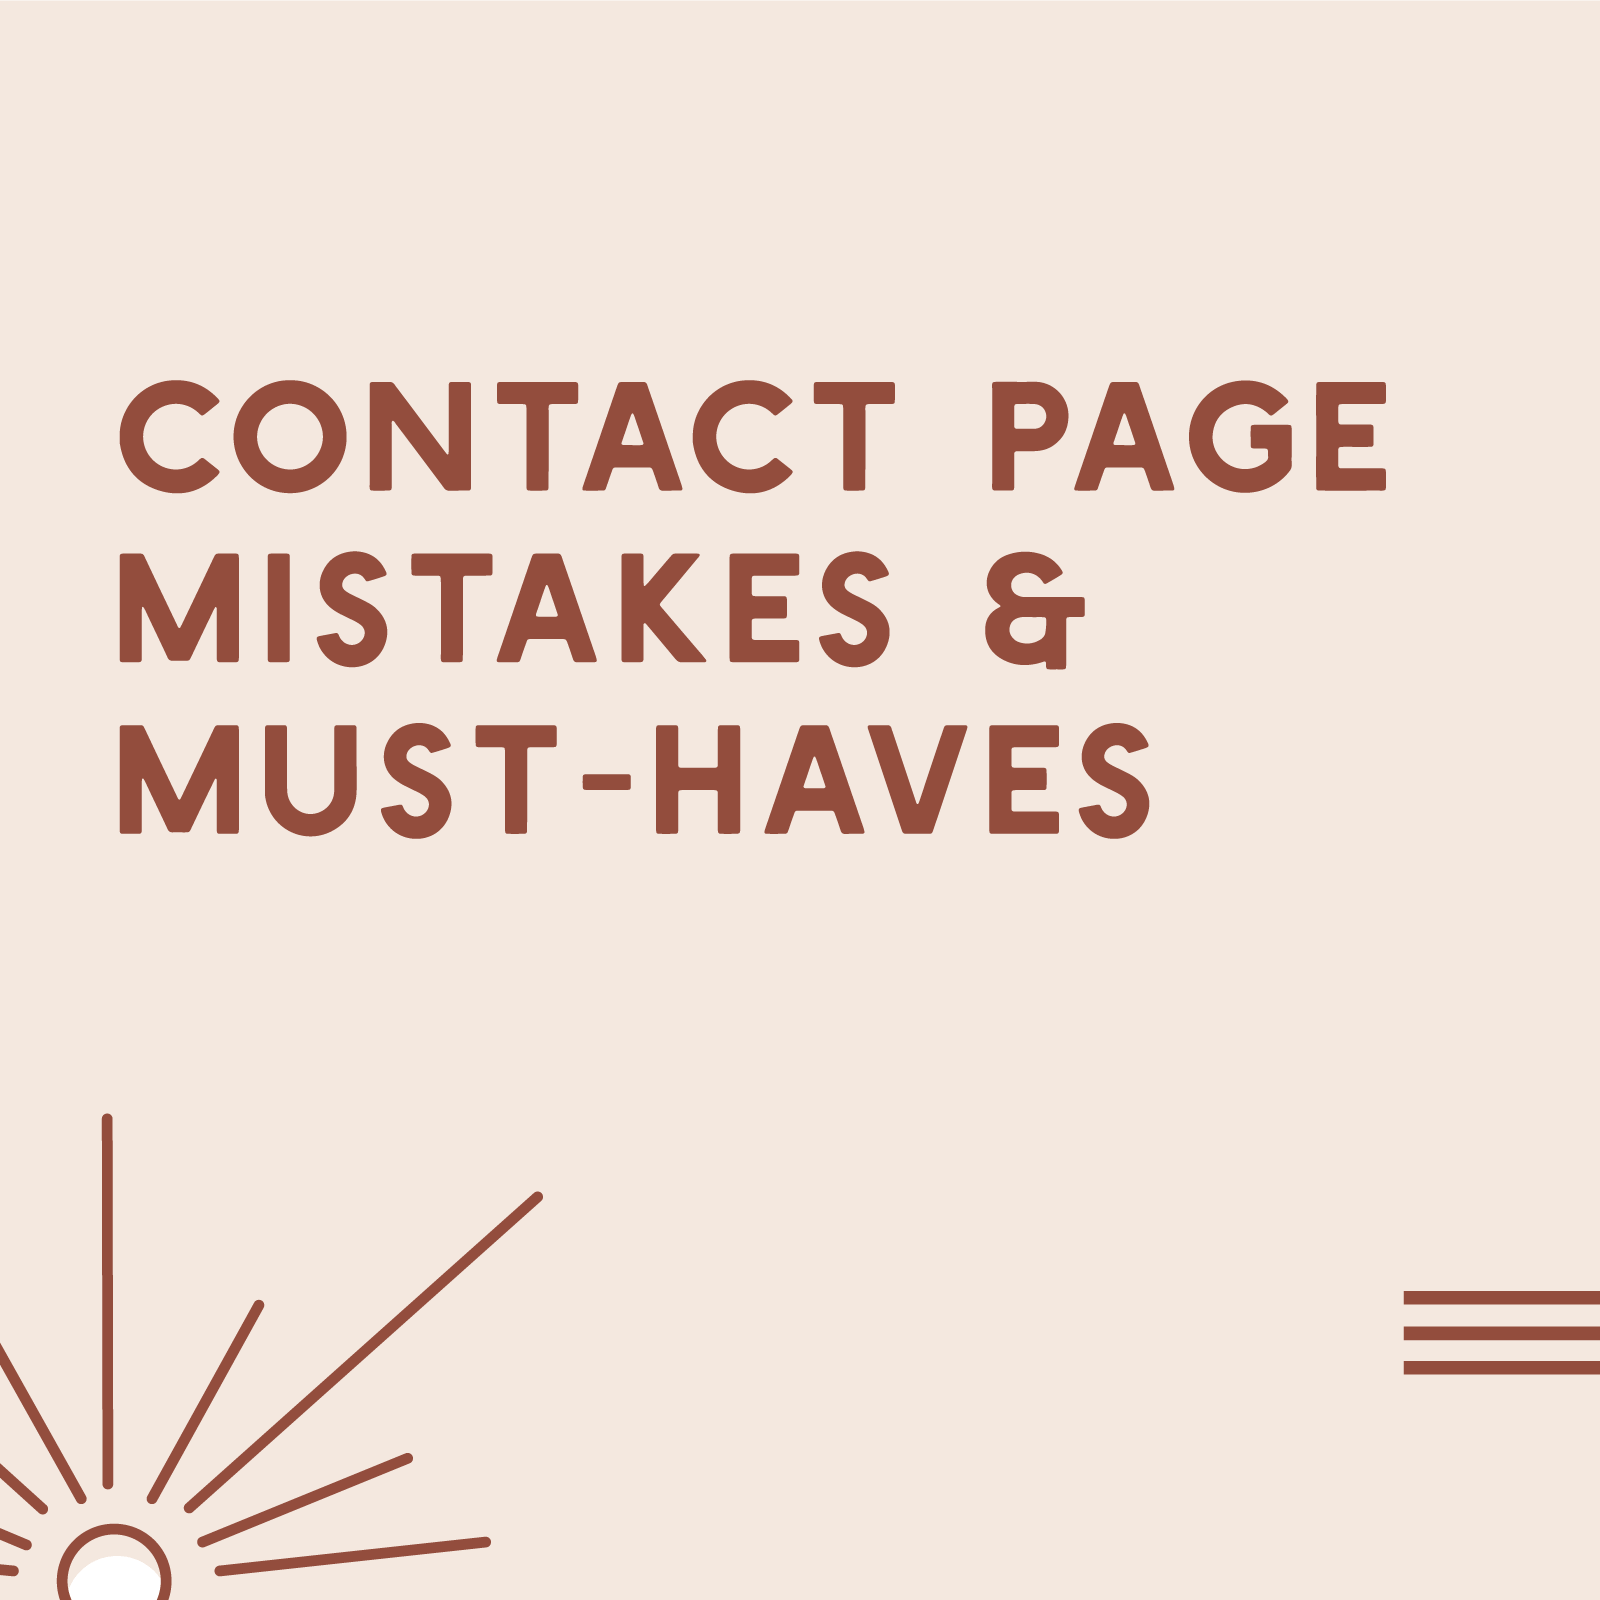 Contact Page Mistakes & Must-Haves